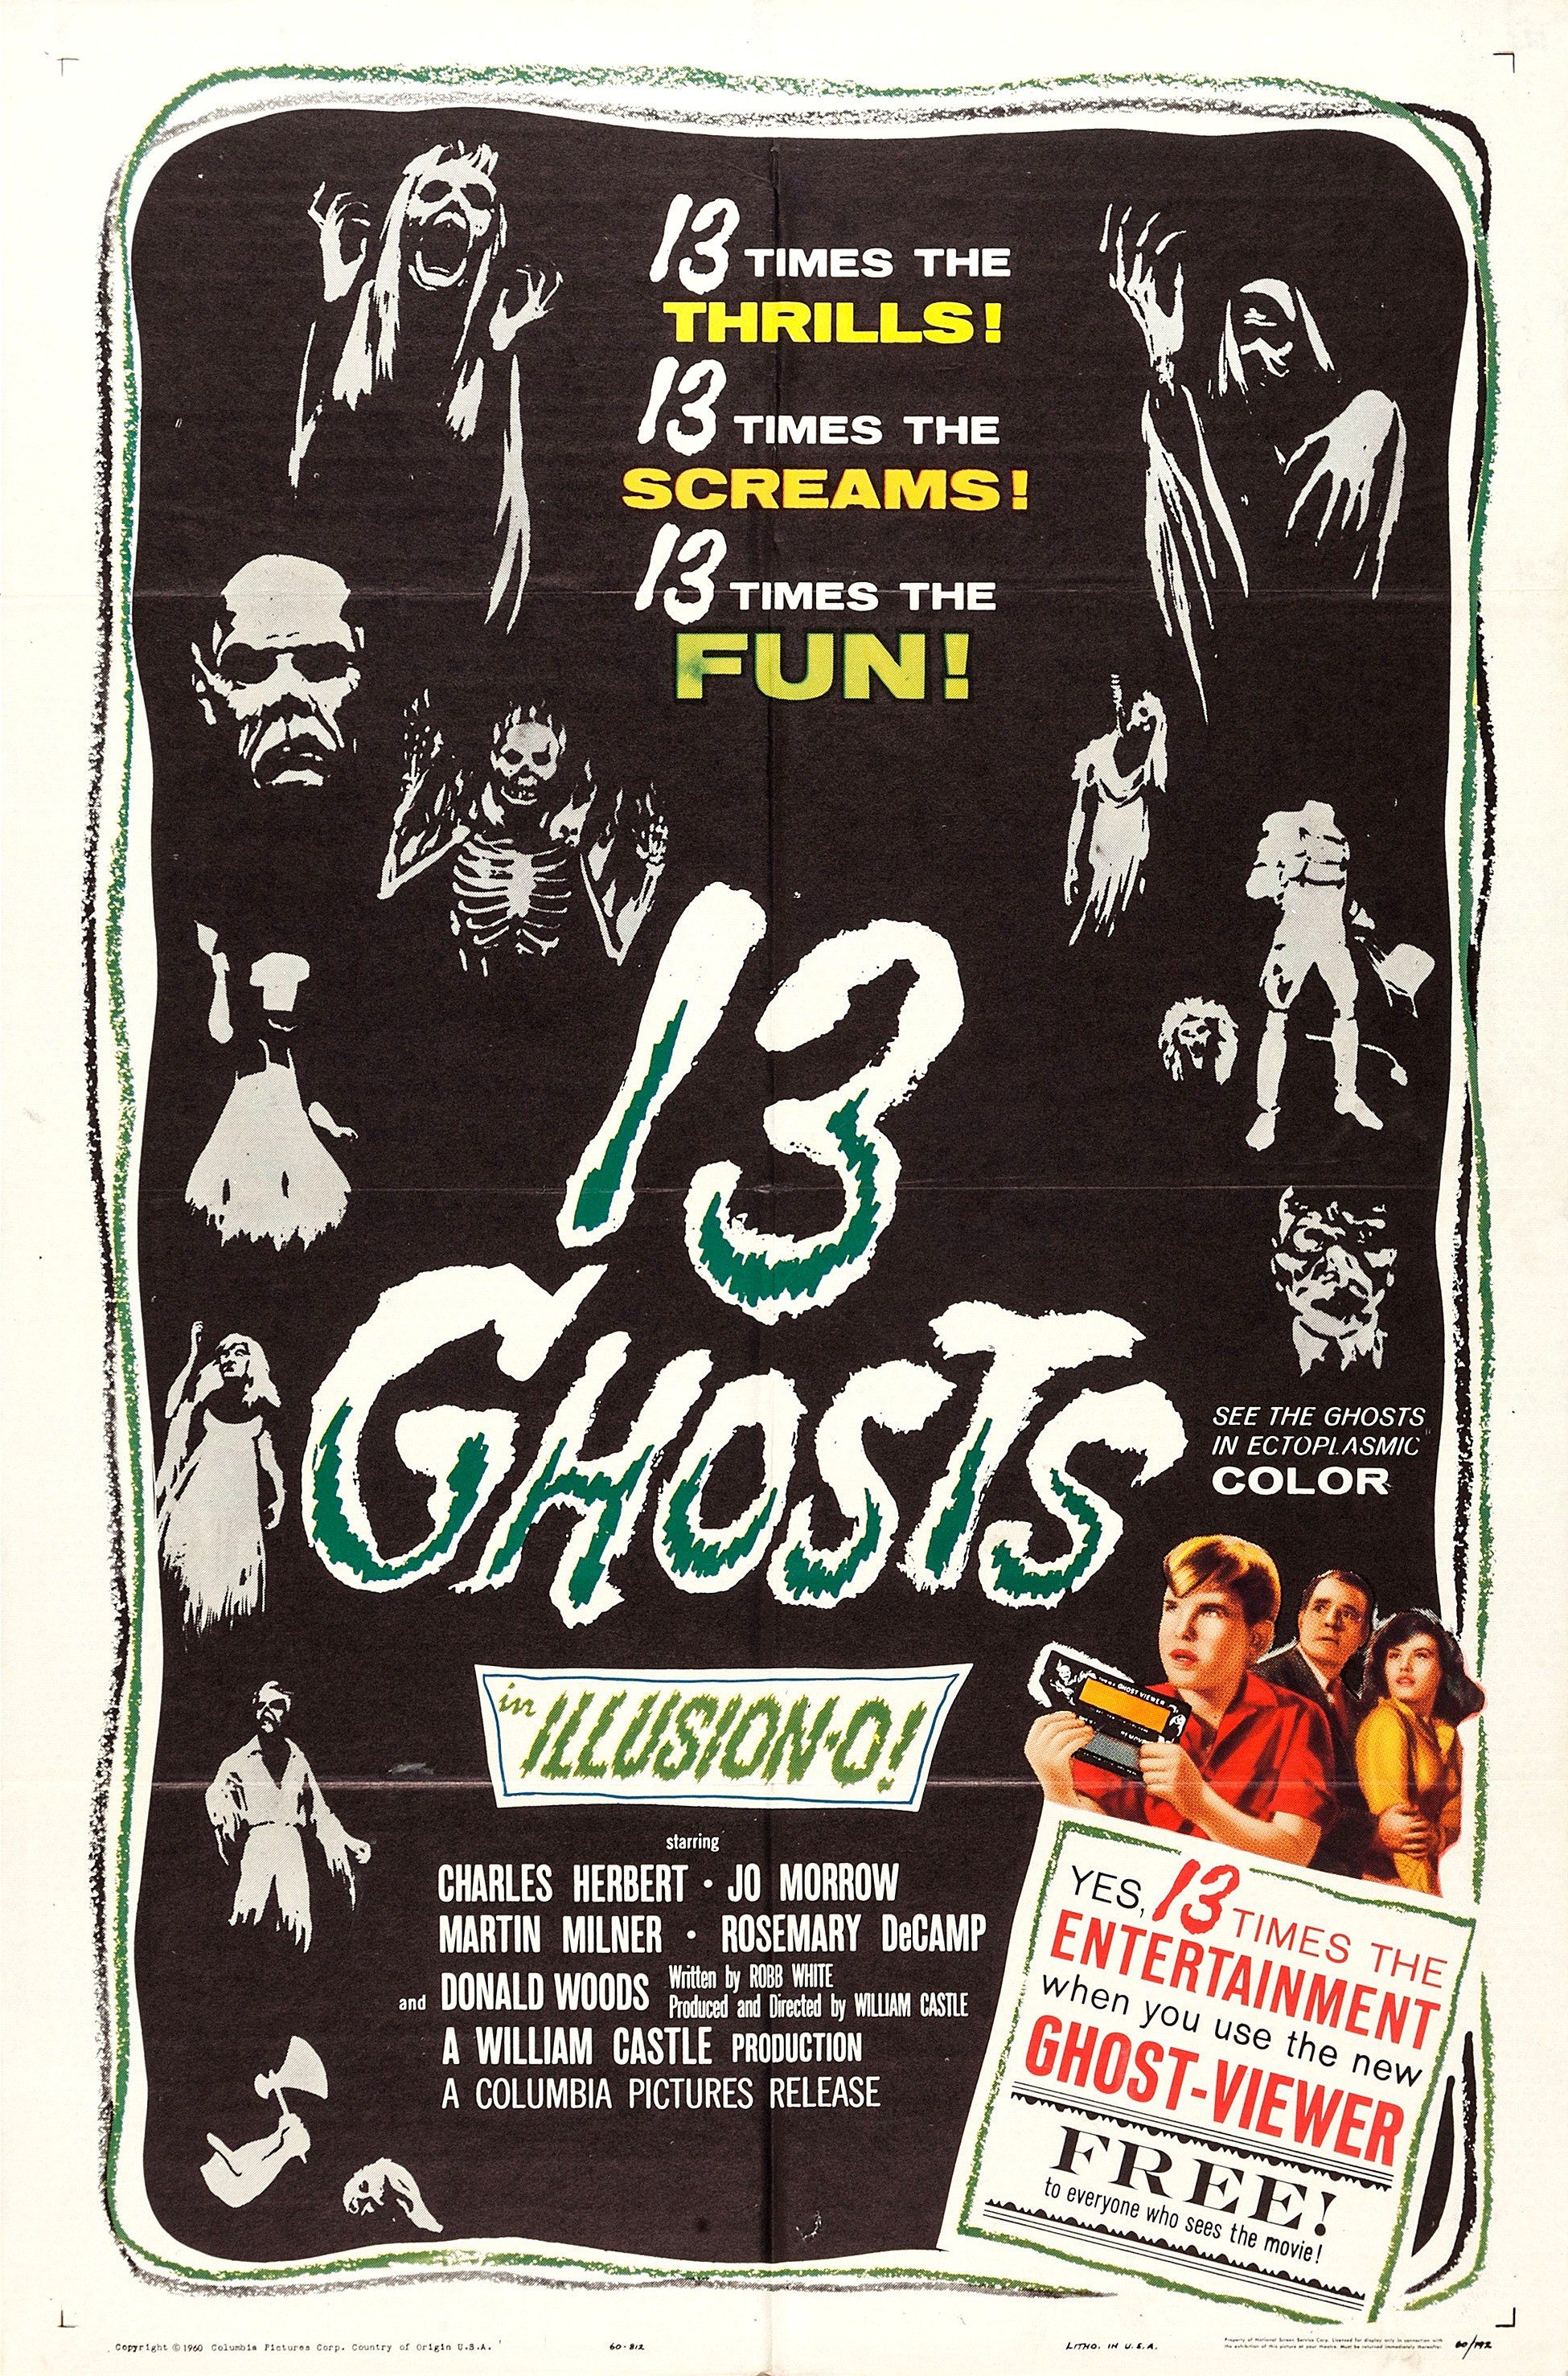 Mega Sized Movie Poster Image for 13 Ghosts (#2 of 3)